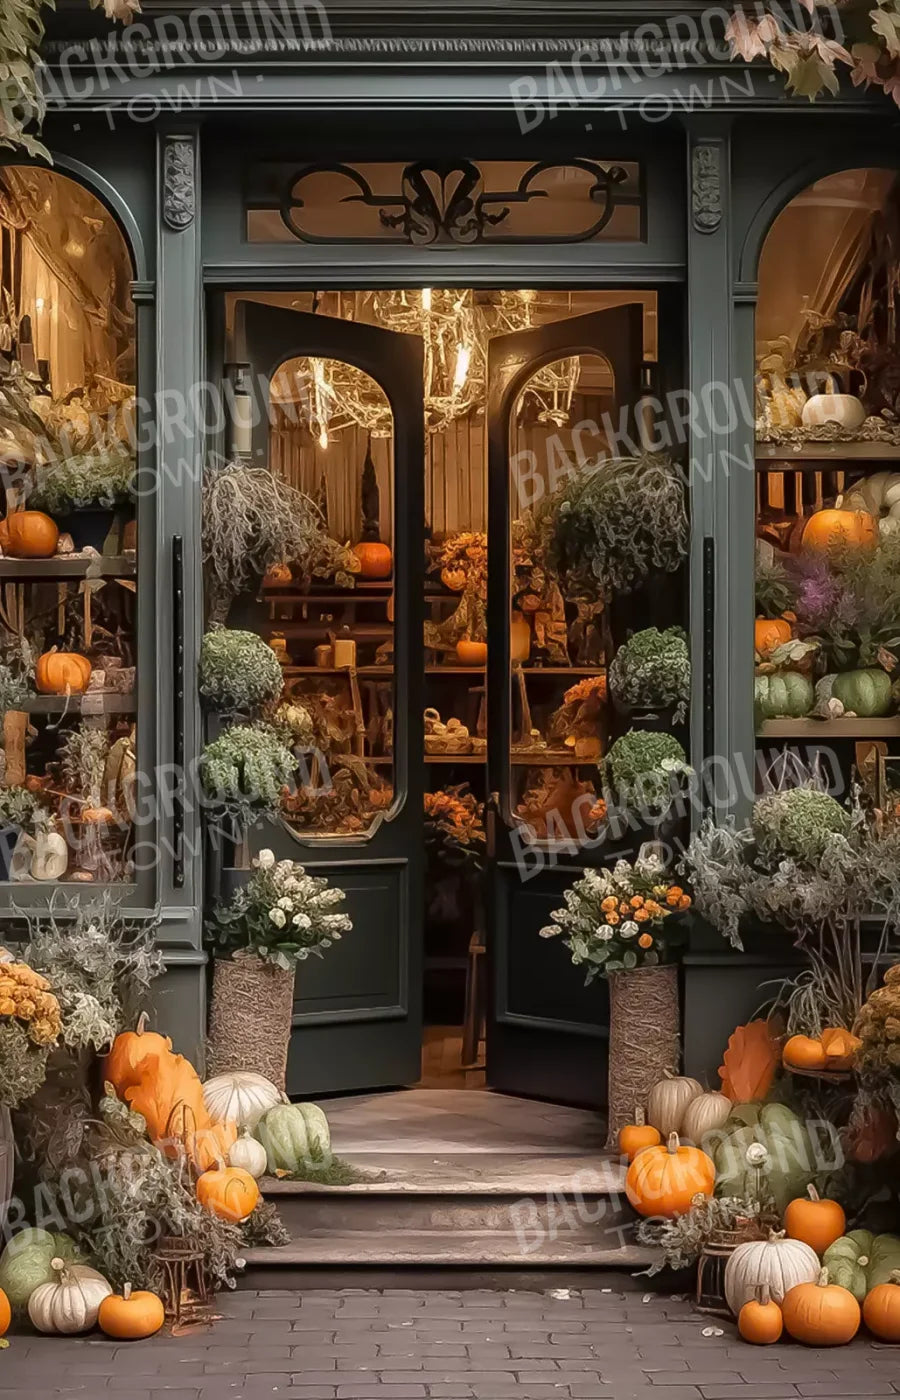 Autumn Store Front 3.1 8X12 Ultracloth ( 96 X 144 Inch ) Backdrop